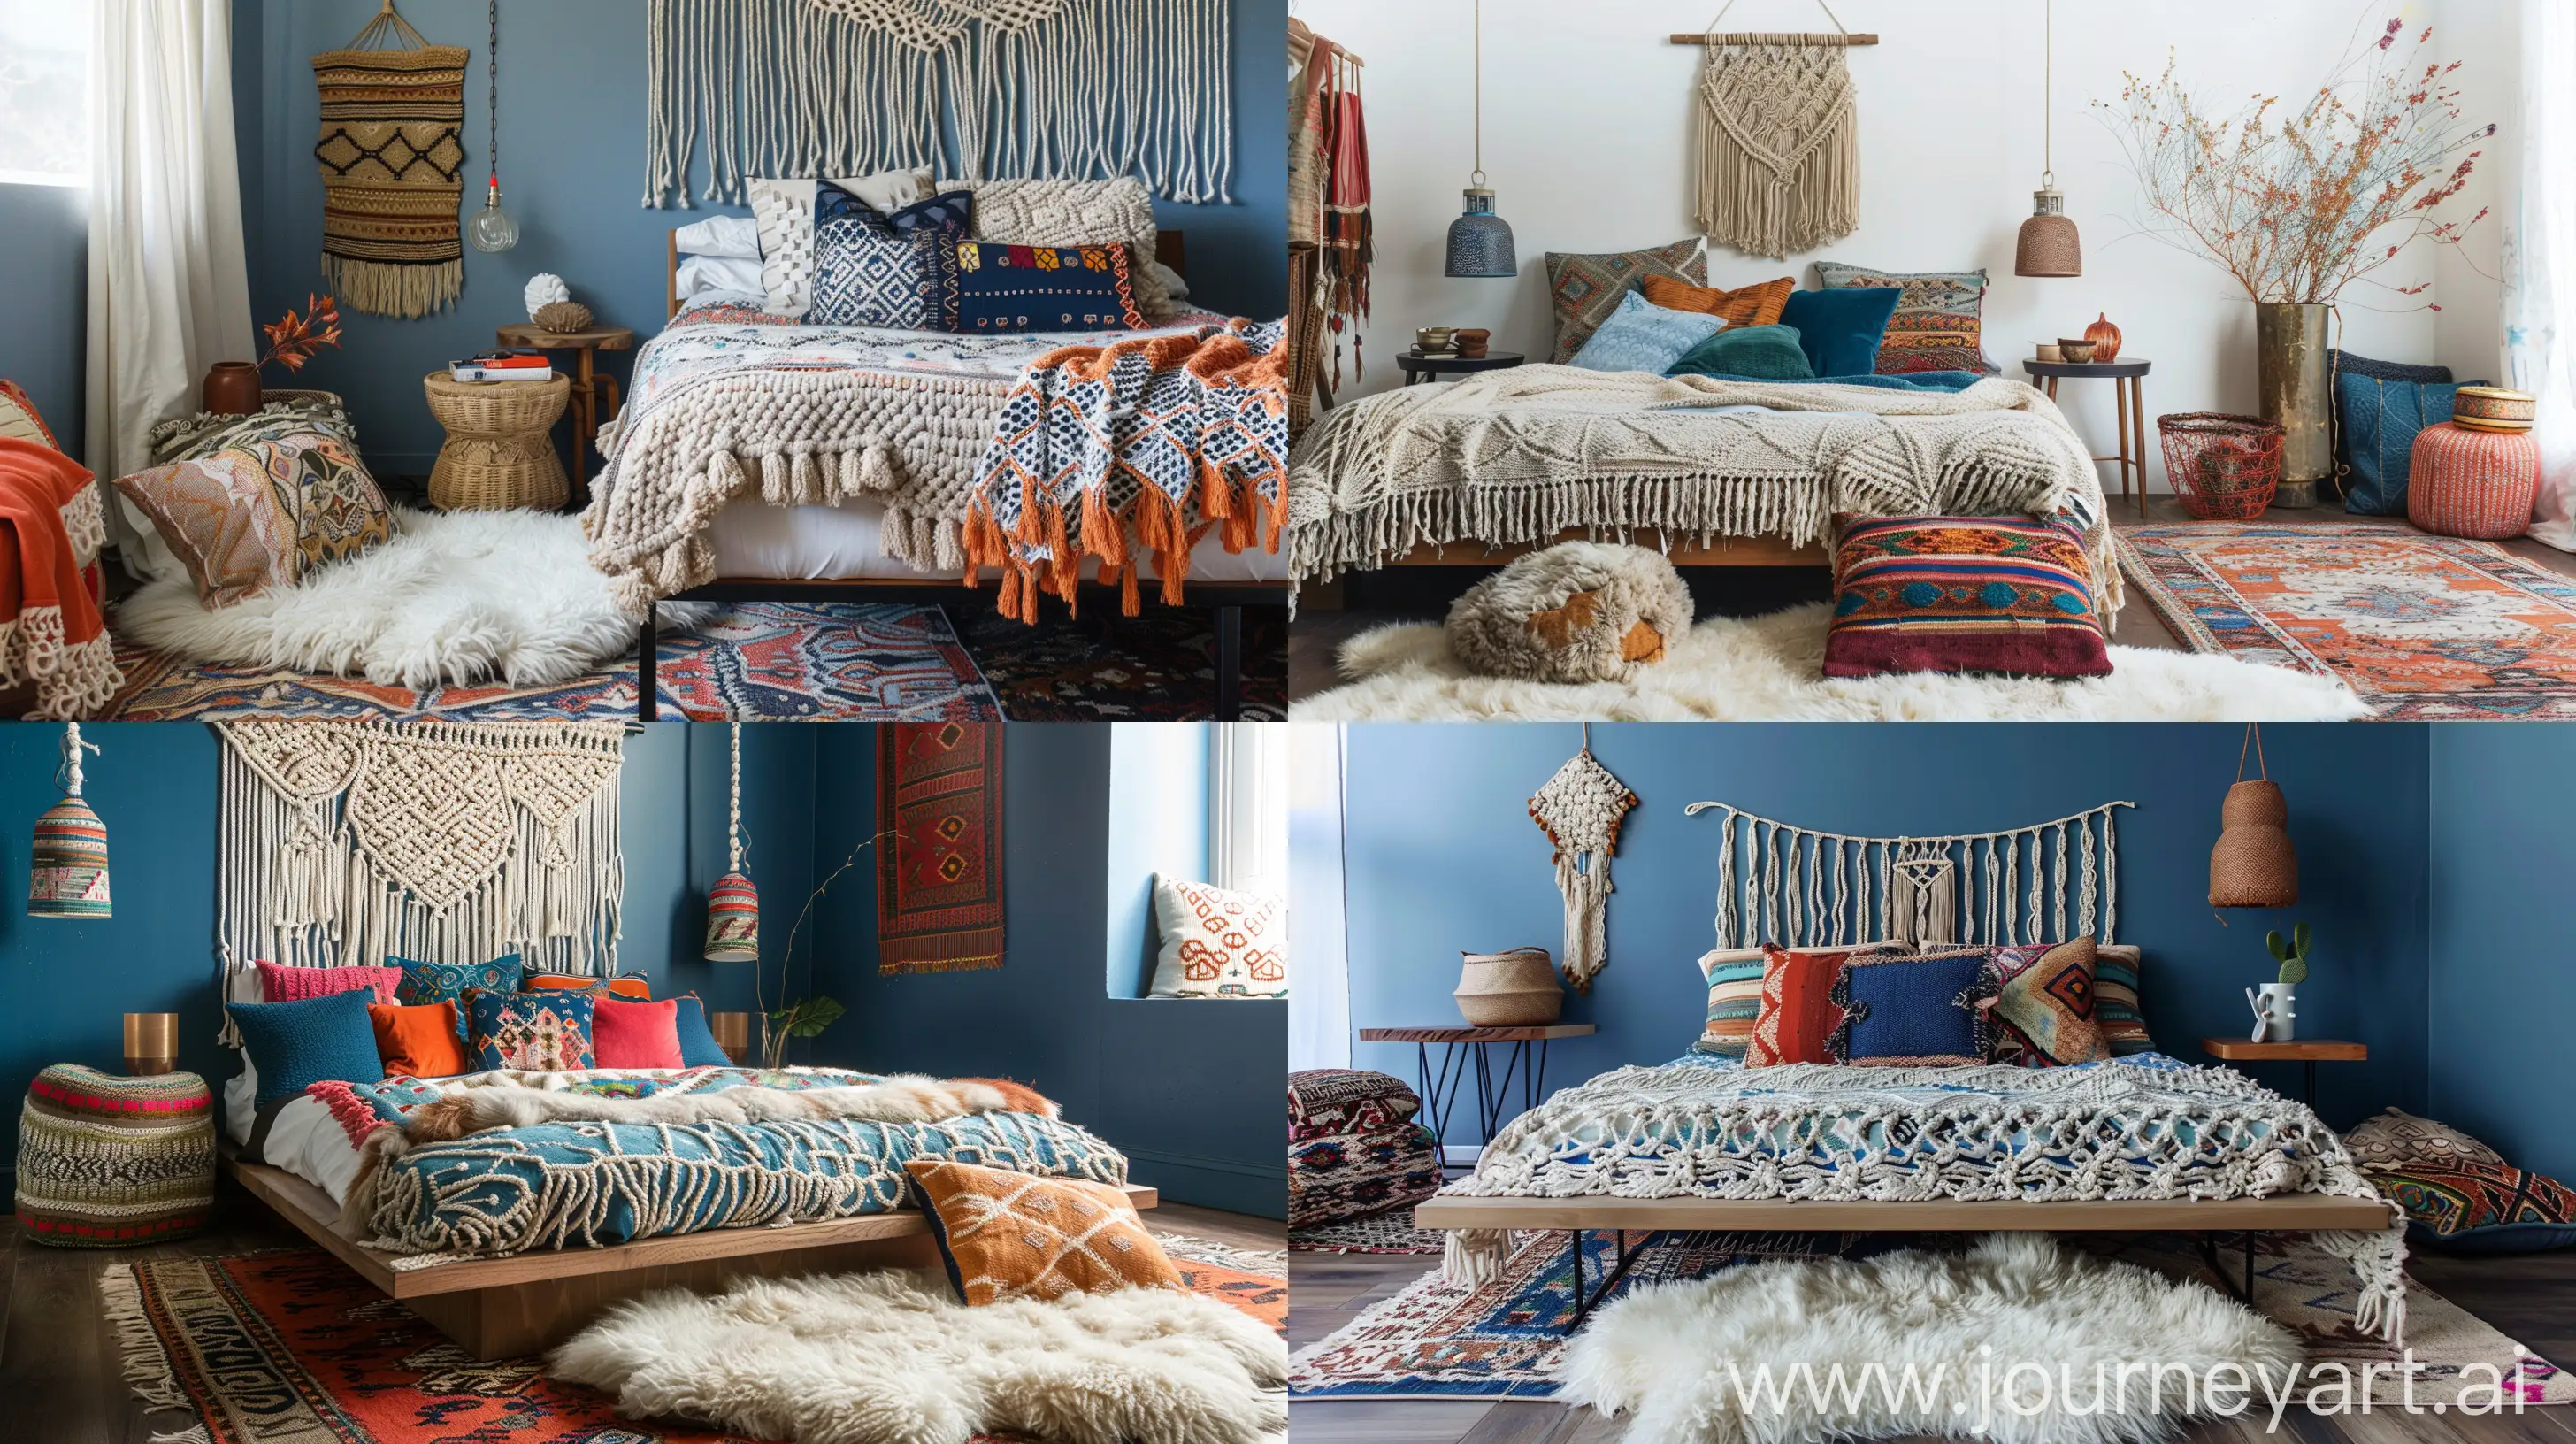 Eclectic Scandinavian Bedroom. Imagine a platform bed with a macramé headboard, a cozy sheepskin rug, and minimalist Scandinavian furniture accented with colorful, patterned throw pillows, Cool Nordic blues, warm earthy neutrals, and pops of vibrant Bohemian patterns. These colors create a soothing yet dynamic space. --ar 16:9